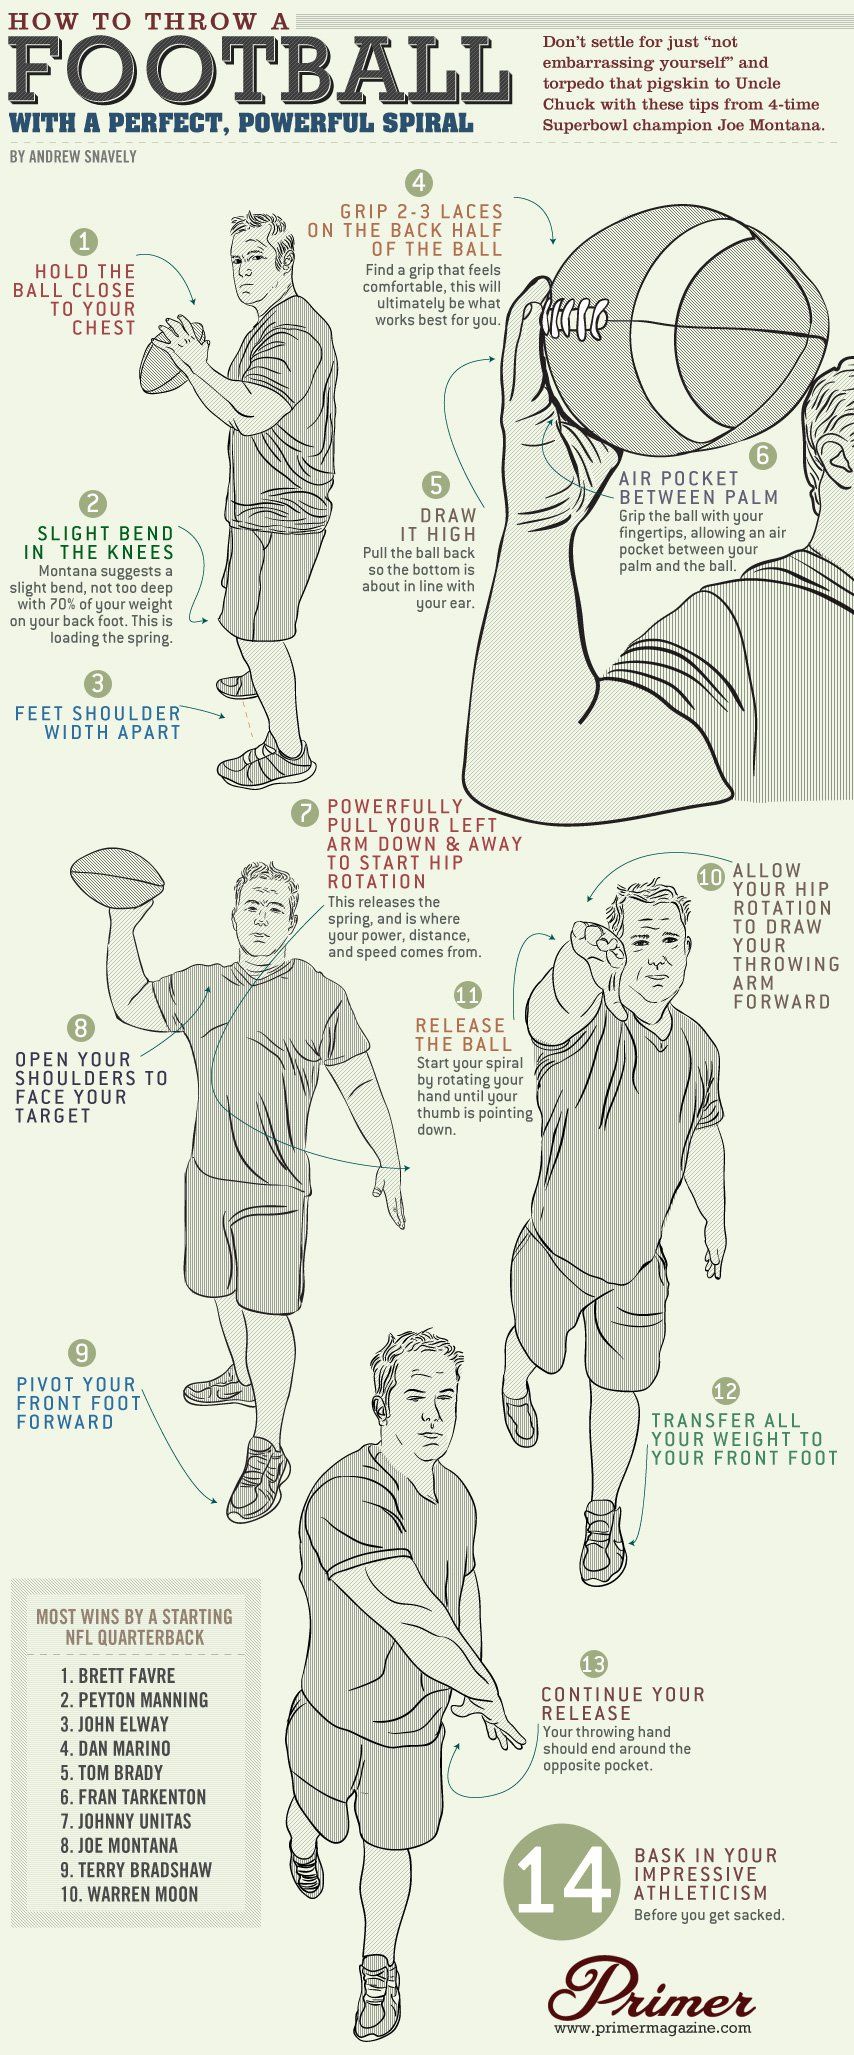 , Football How to Throw a Football with a Perfect, Powerful Spiral – A Visual Guide|Pinterest